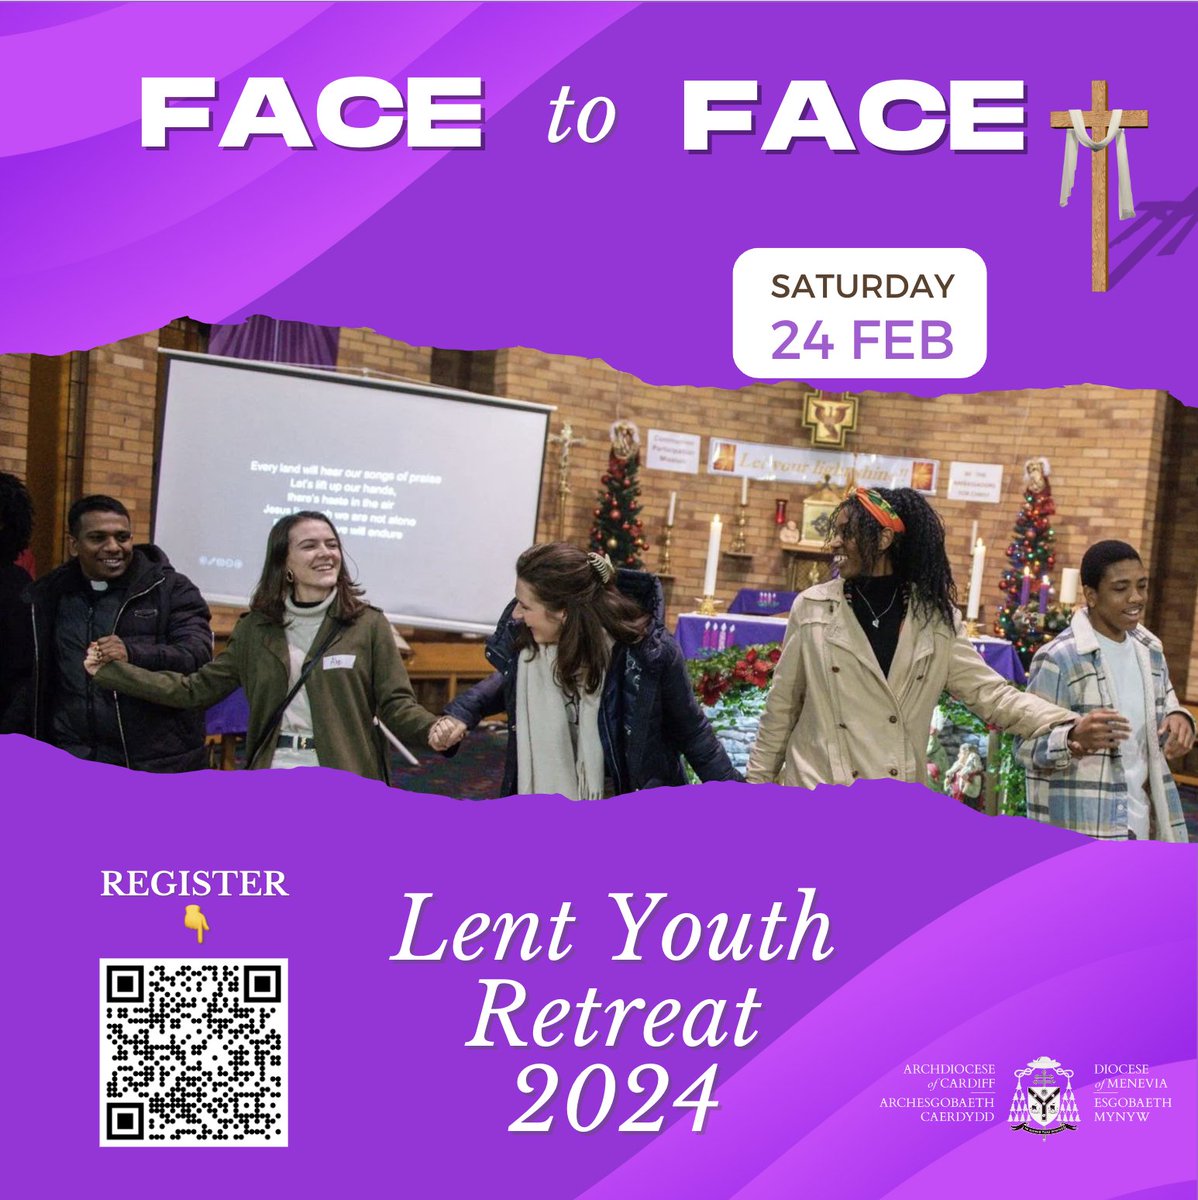 So, we've finalised a day for our next Youth Retreat. It will be Saturday 24th February. 🟣 Talks and discussions 🟣 Prayer, Mass and Adoration 🟣 Meet new friends 🟣 Choir 🟣 Good food 🟣 Fun Click the link to book 👇